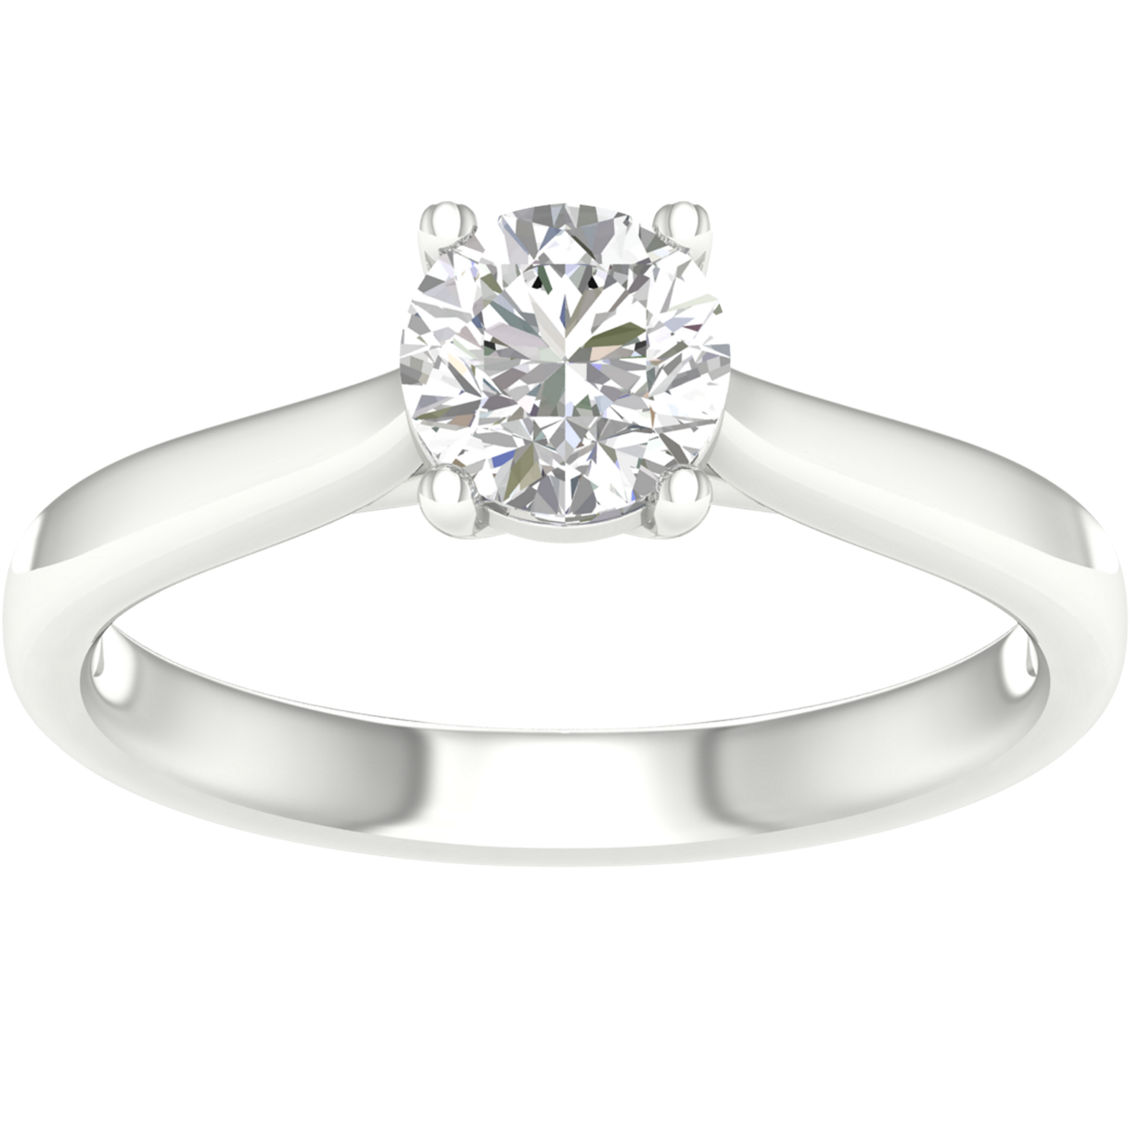 Pure Brilliance 14K White Gold 1 CTW Round Solitaire Ring with IGI Certification